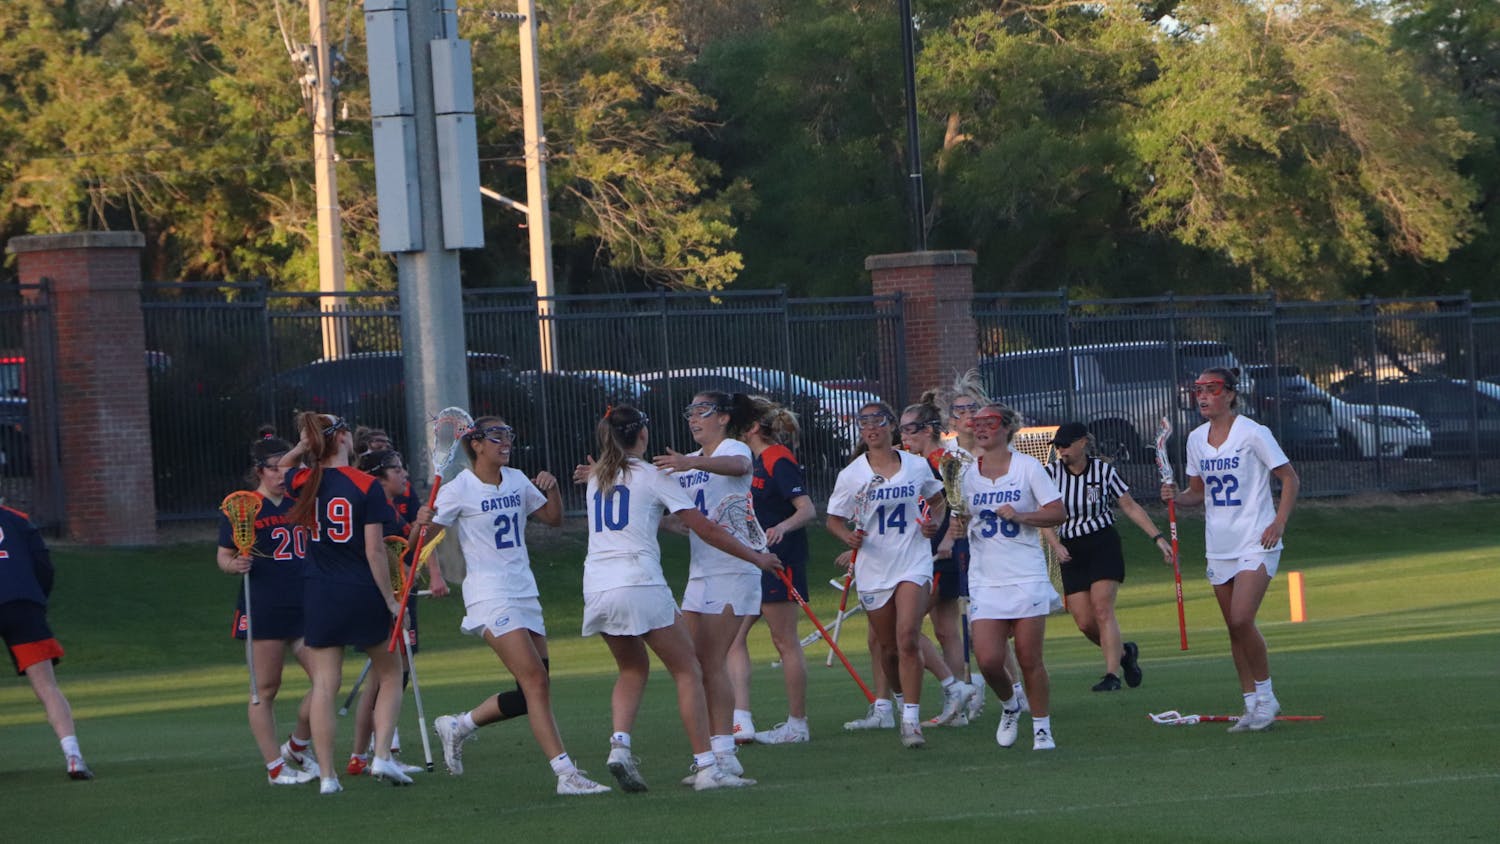 Florida secured the regular season AAC Championship Saturday in a 16-4 win over the East Carolina Pirates.